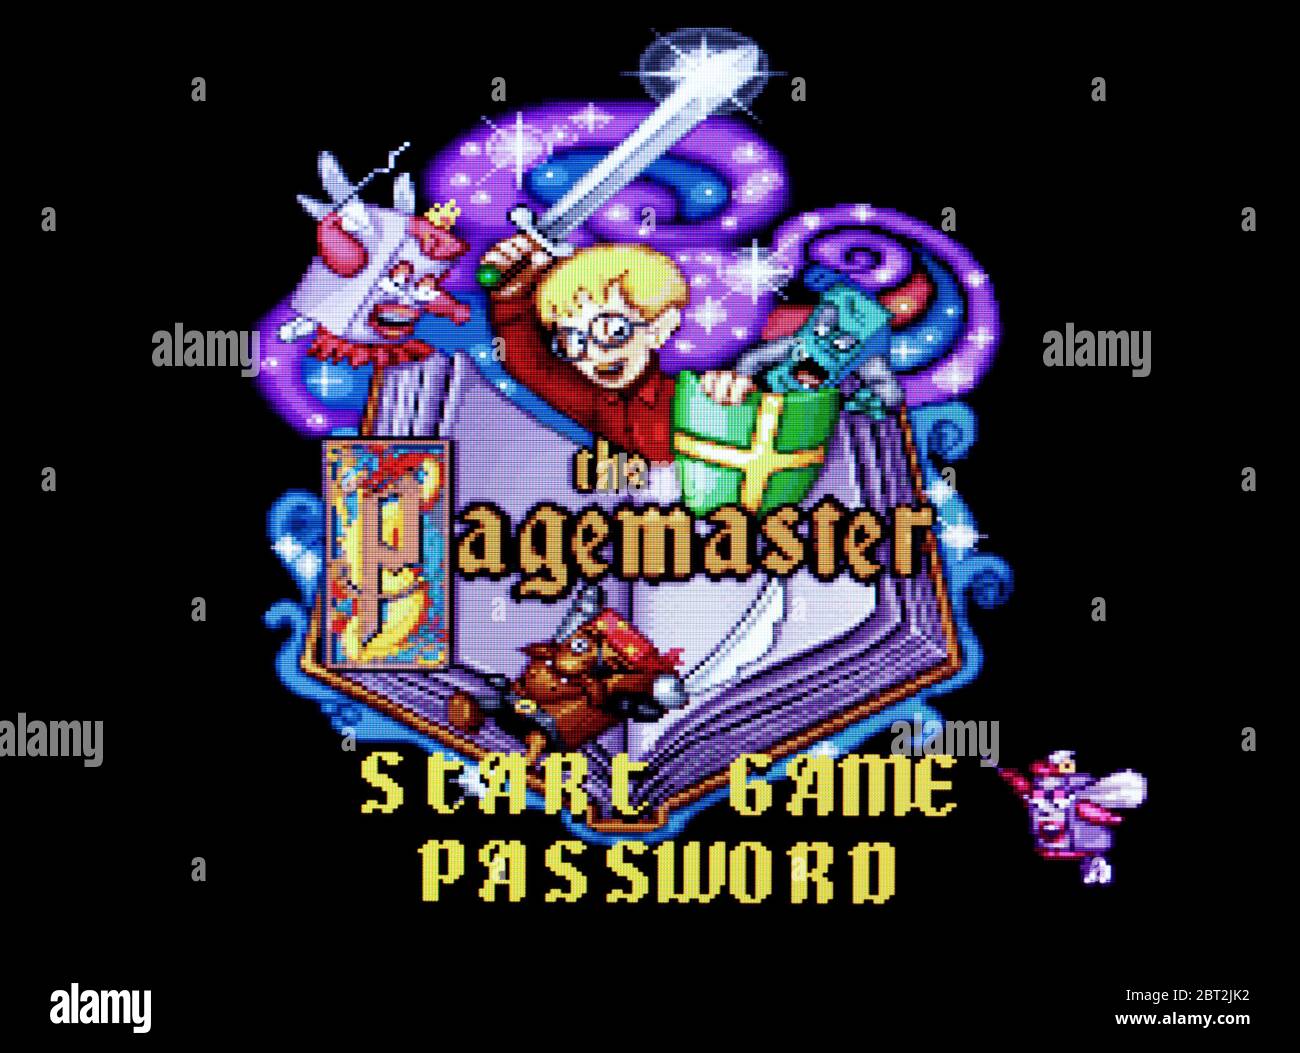 the pagemaster snes